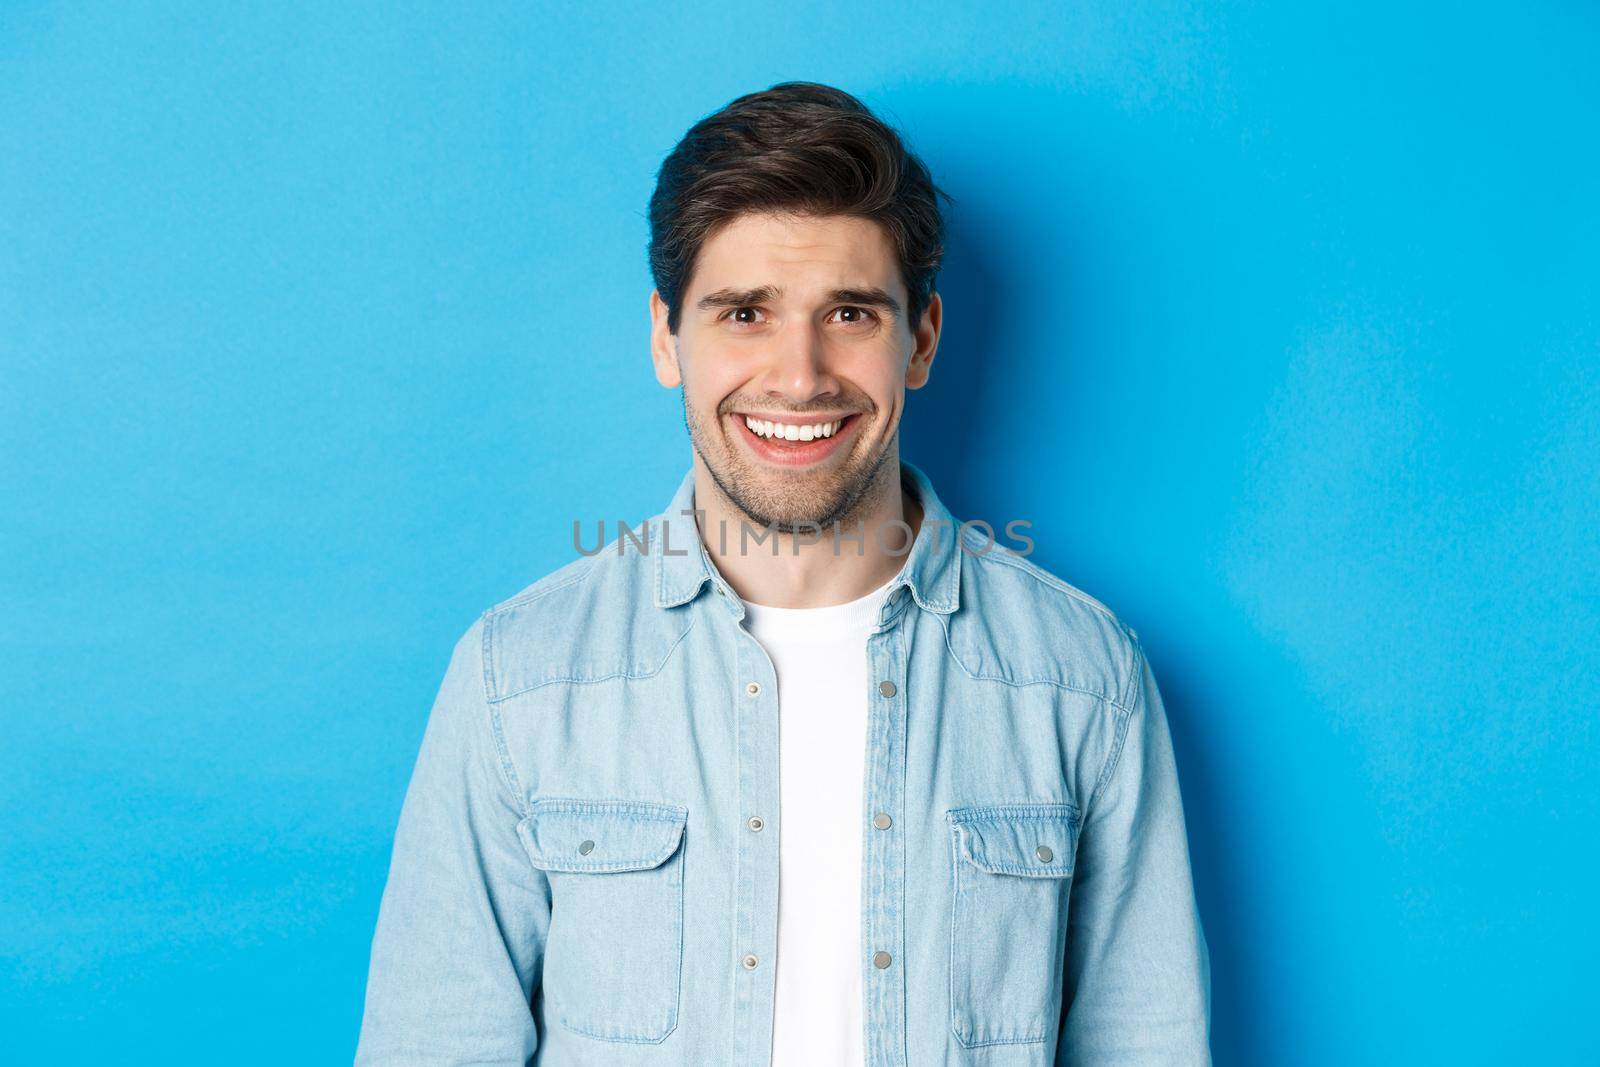 Close-up of young man feeling awkward, smile and cringe from uncomfortable situation, standing over blue background.